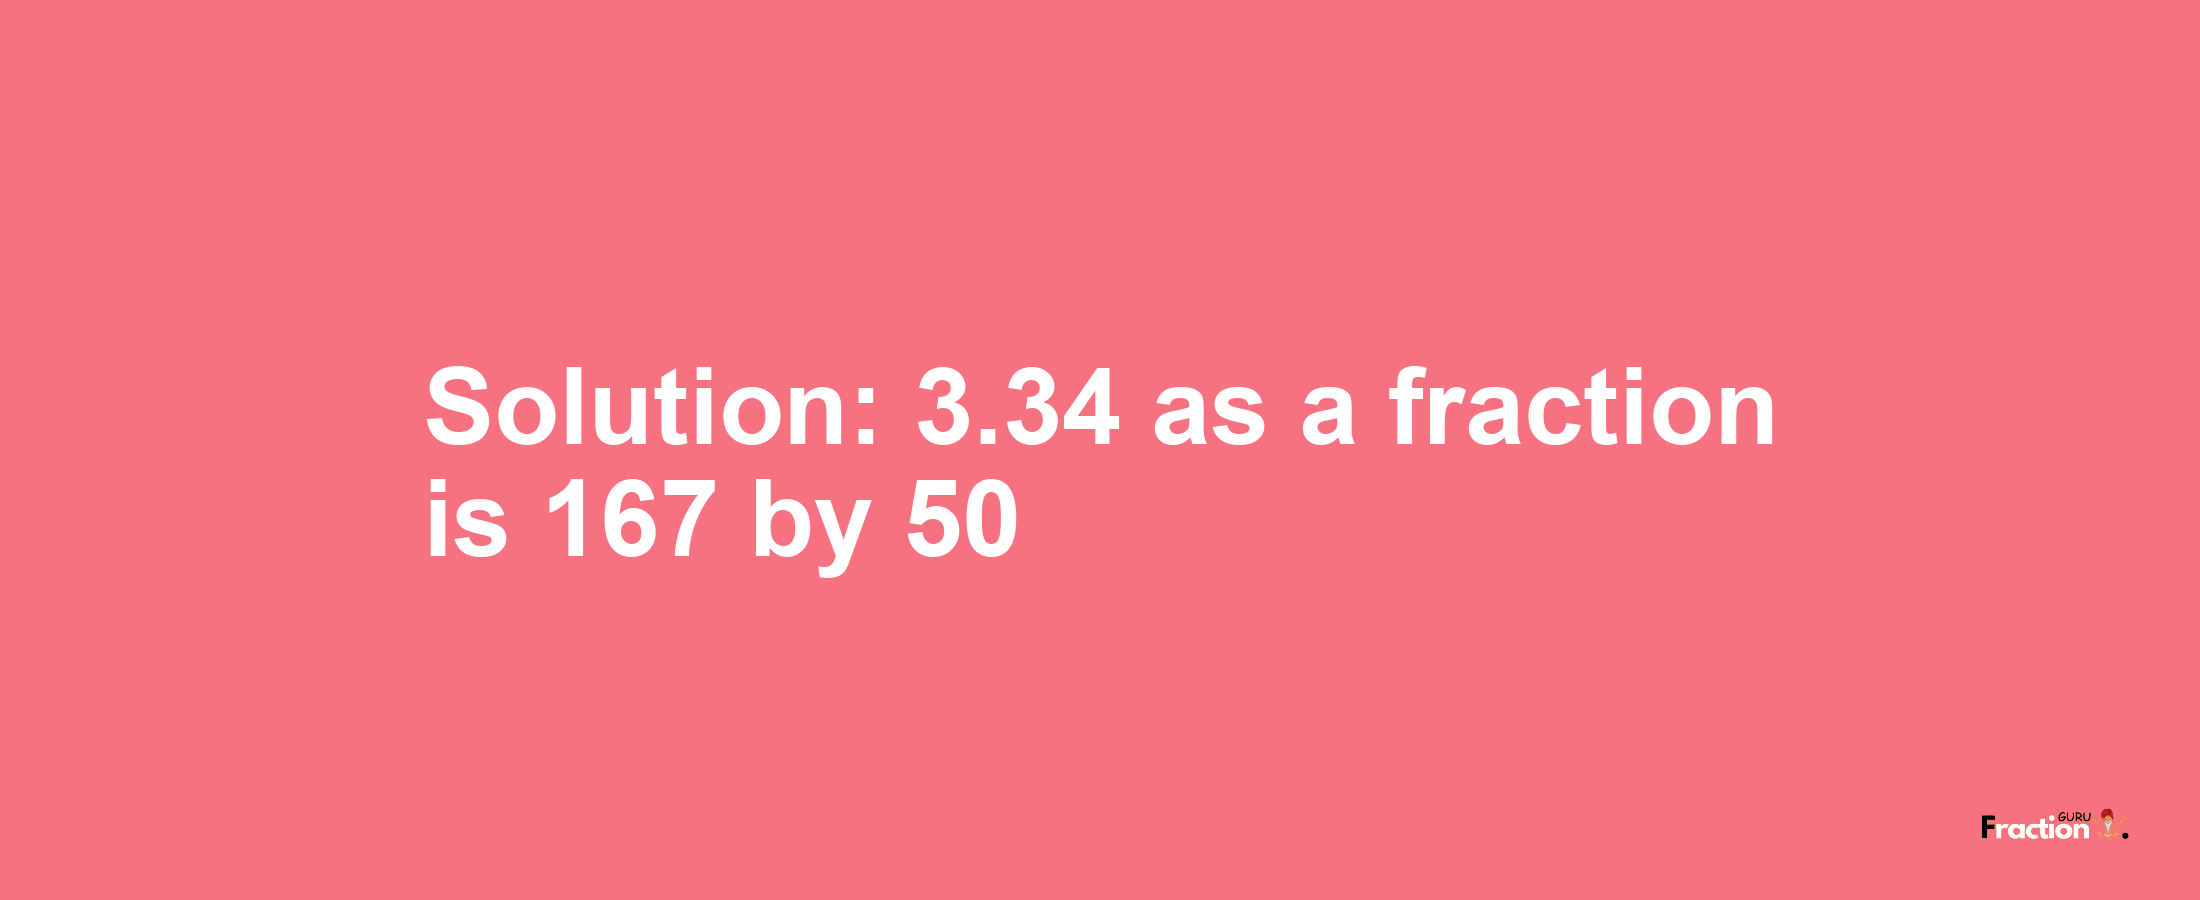 Solution:3.34 as a fraction is 167/50